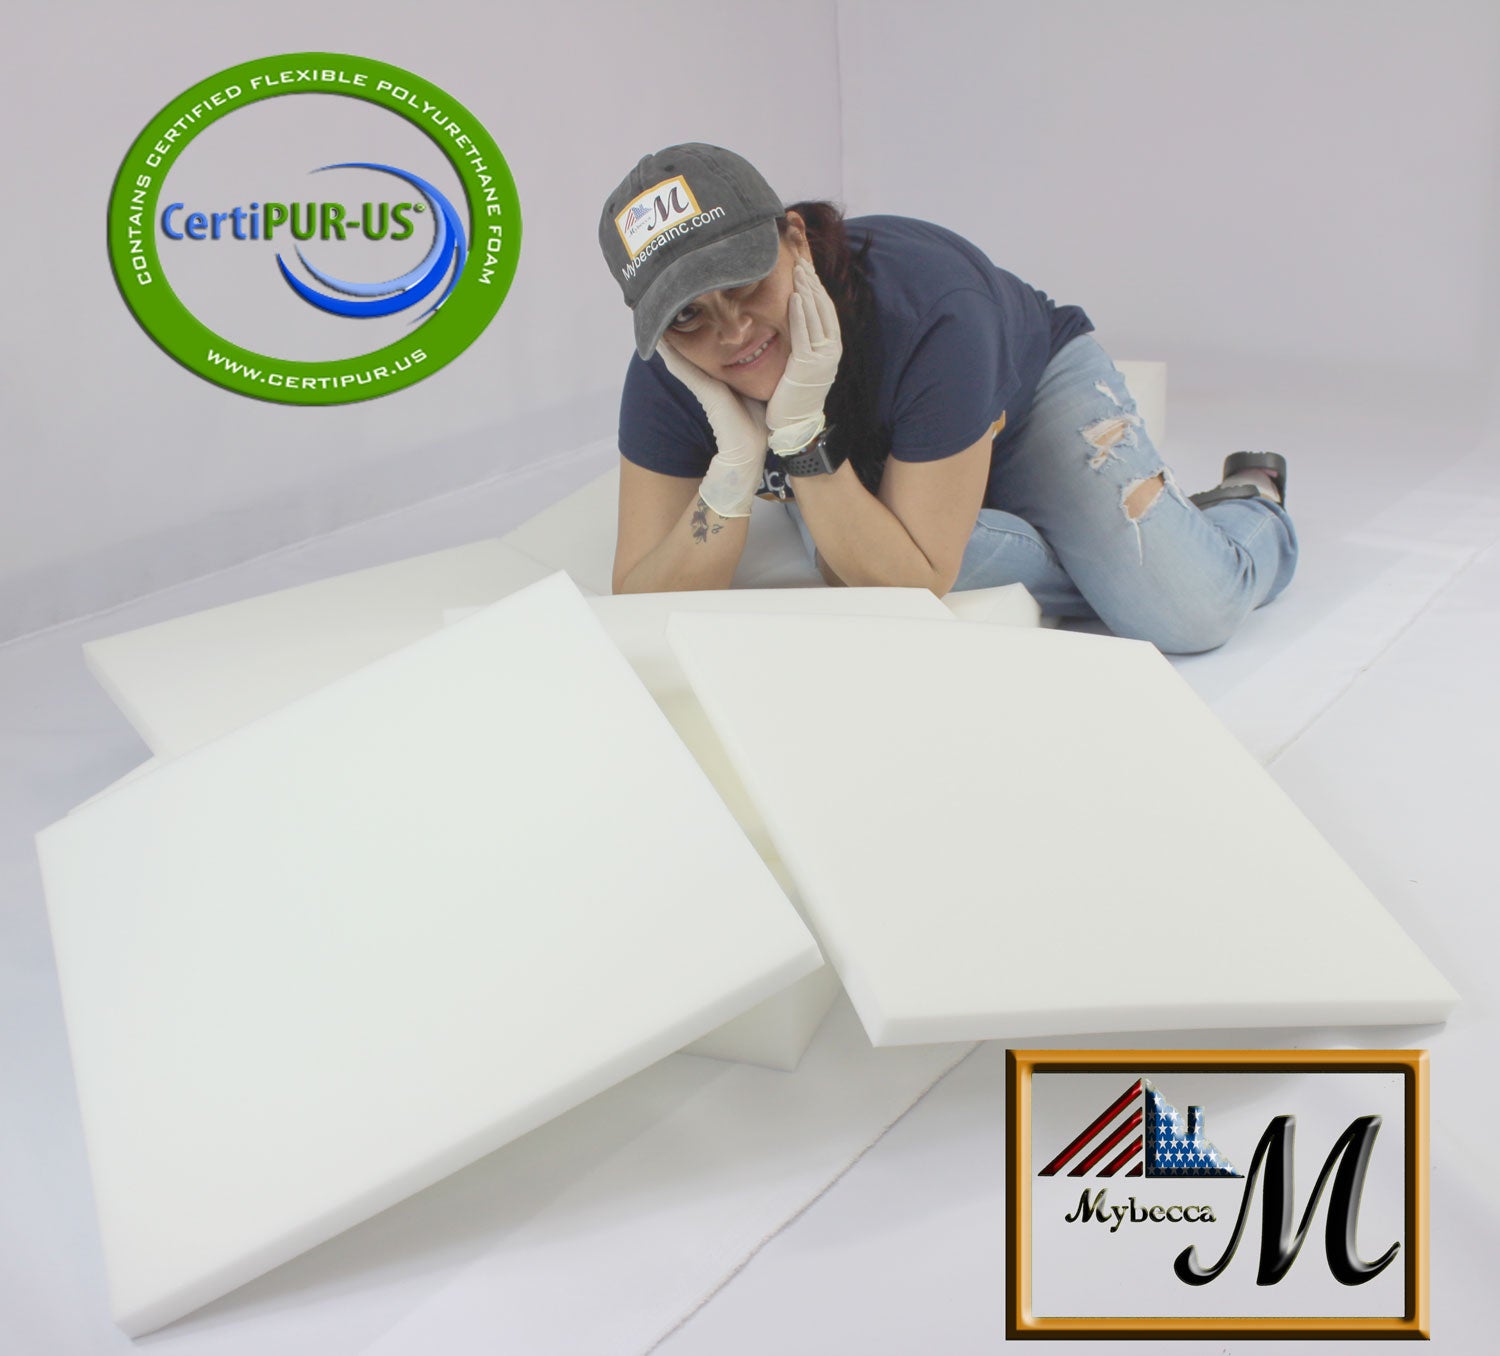 24 x 120 High Density Upholstery Foam Cushion (Seat Replacement,  Upholstery Sheet, Foam Padding)Made in USA Fast Shipping